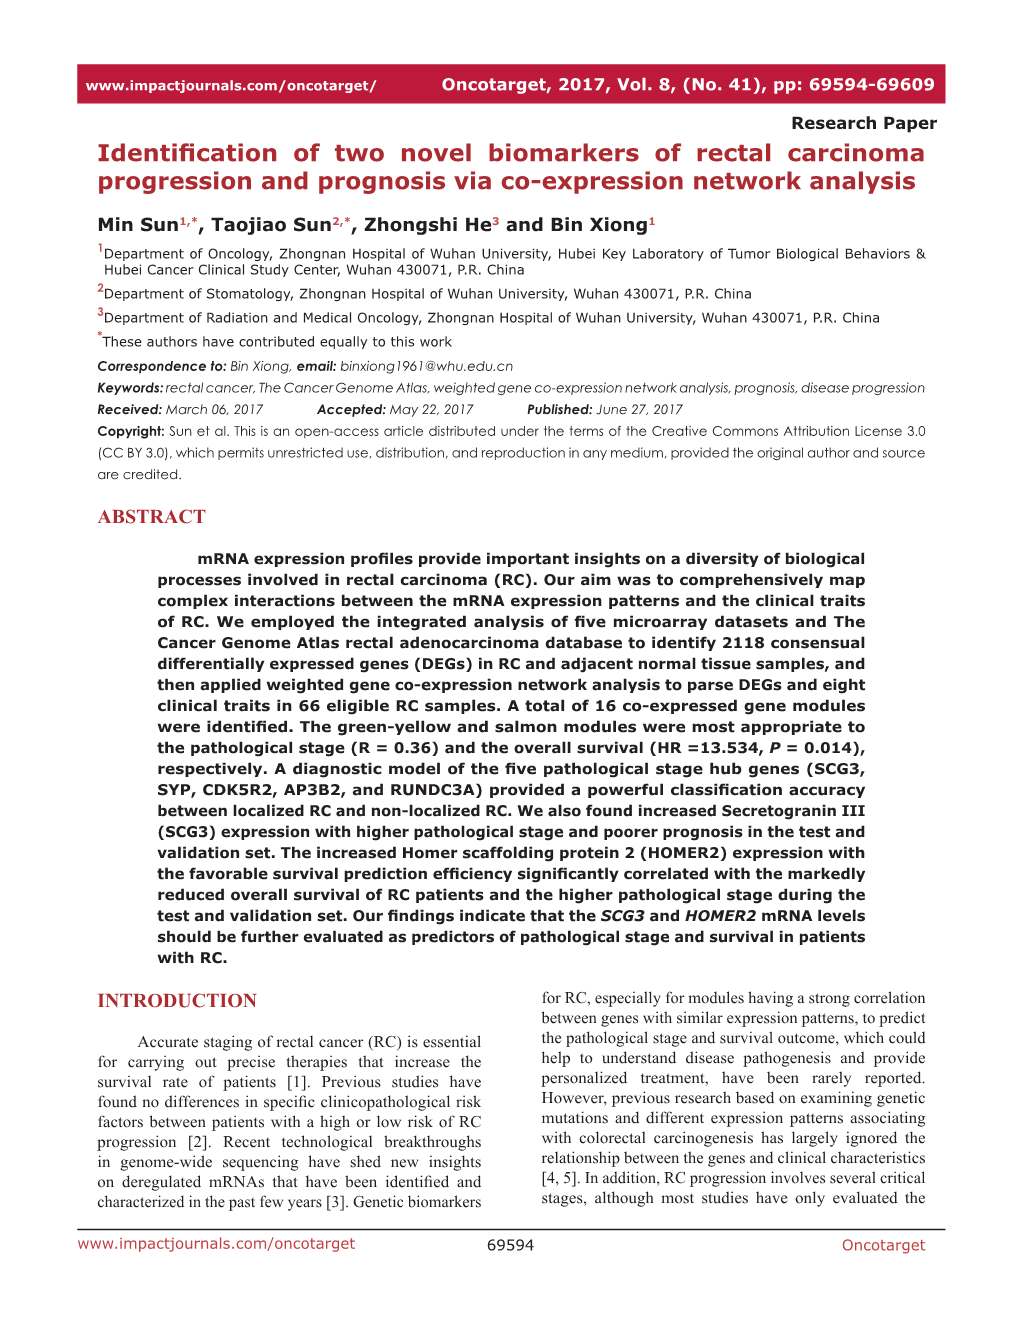 Identification of Two Novel Biomarkers of Rectal Carcinoma Progression and Prognosis Via Co-Expression Network Analysis